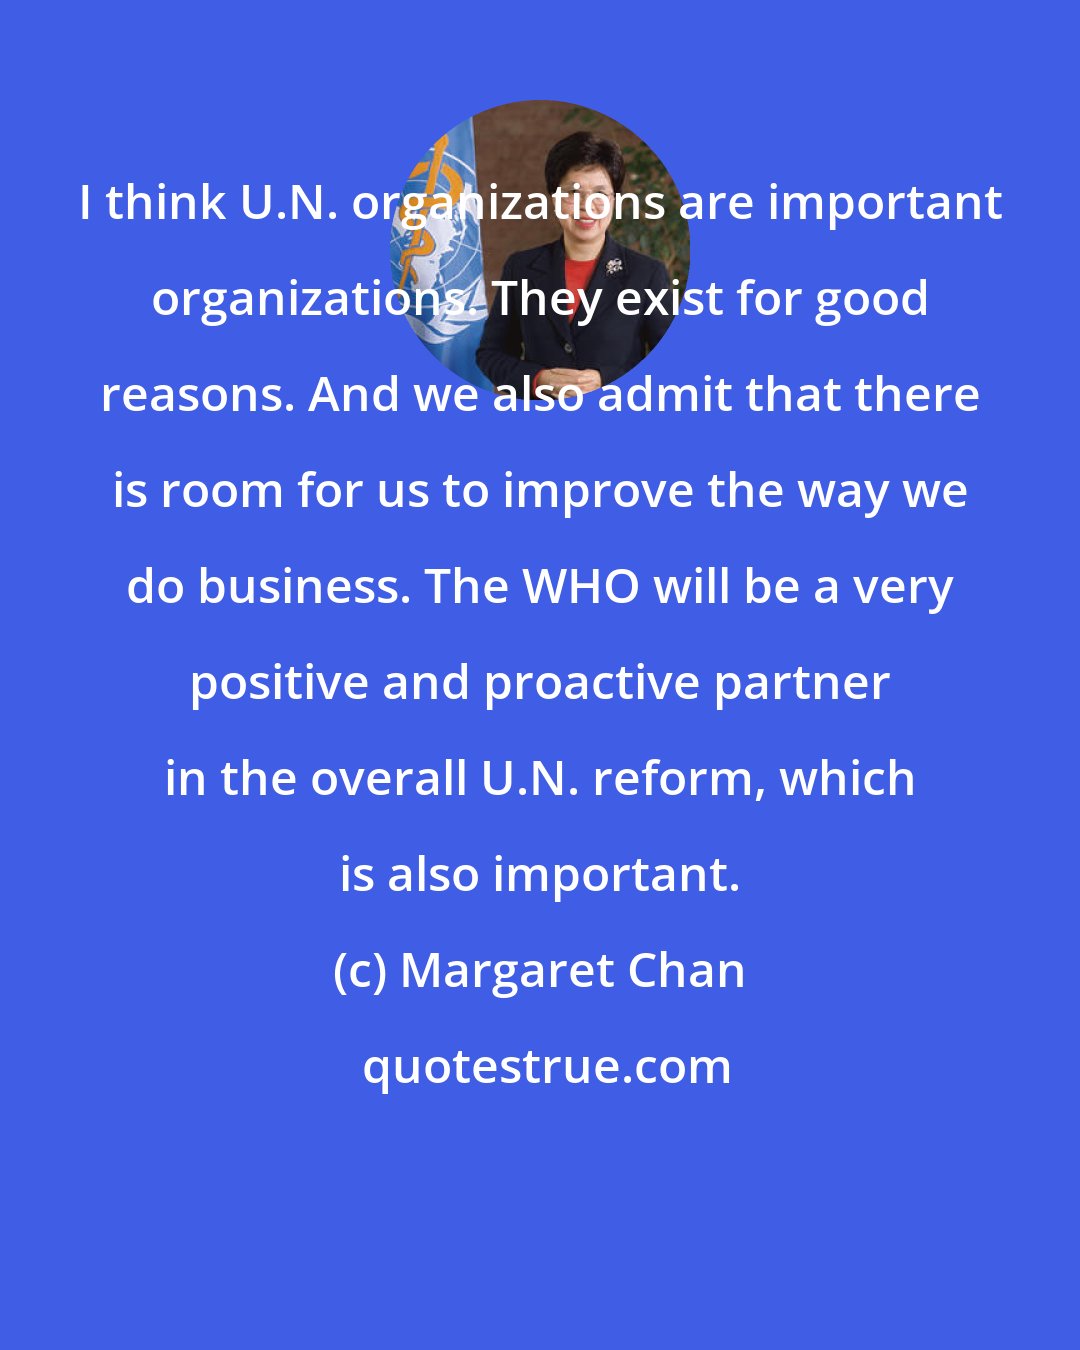 Margaret Chan: I think U.N. organizations are important organizations. They exist for good reasons. And we also admit that there is room for us to improve the way we do business. The WHO will be a very positive and proactive partner in the overall U.N. reform, which is also important.